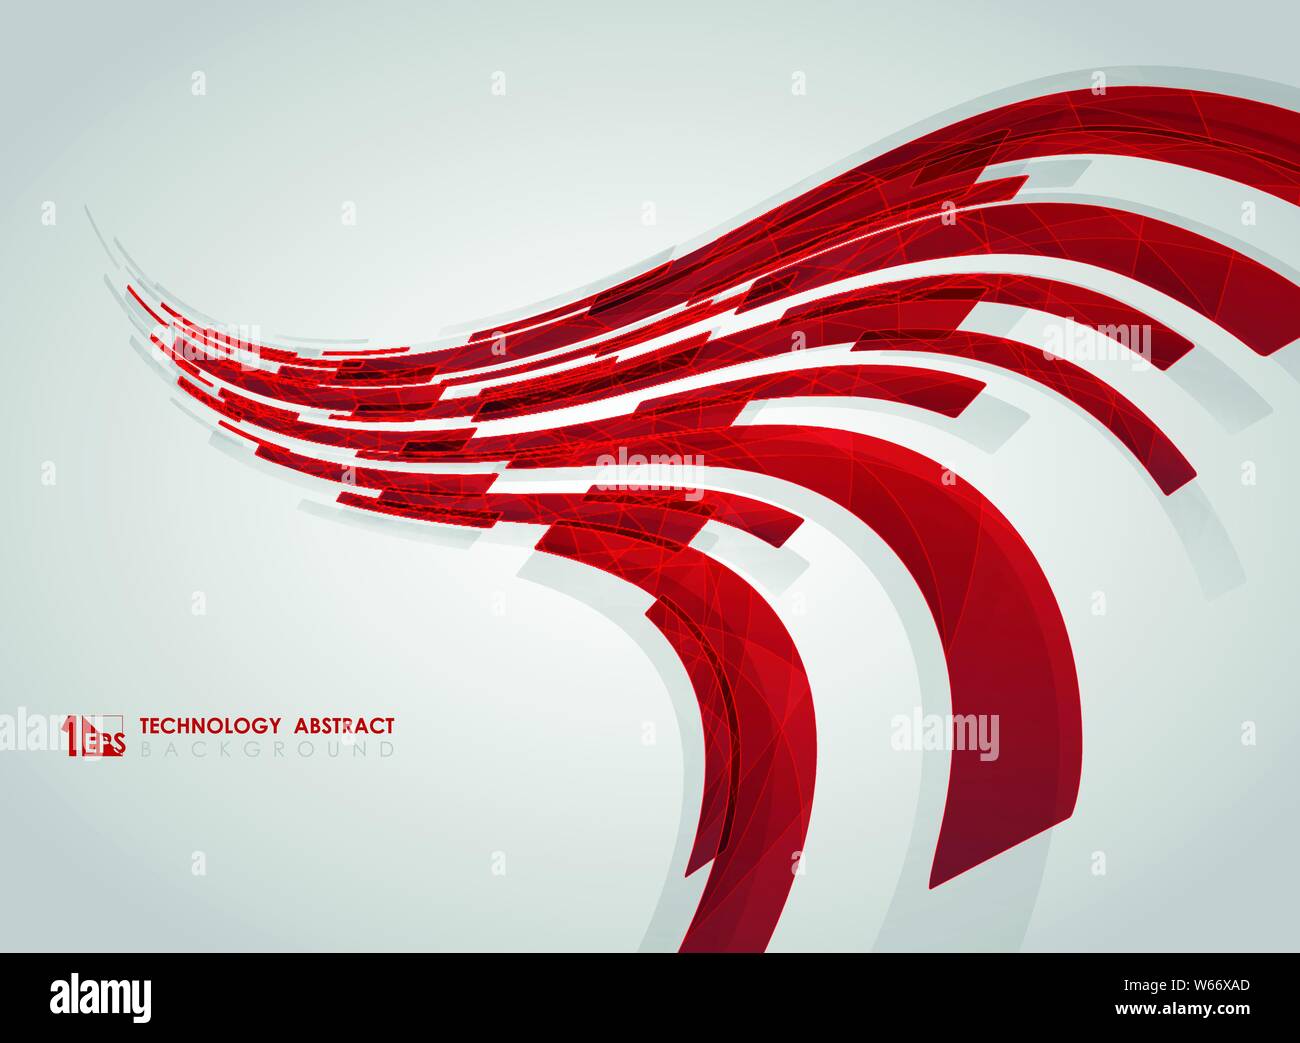 Abstract curved red technology stripe lines square geometric background. You can use for cover design of futuristic, ad, poster, print, book, artwork. Stock Vector